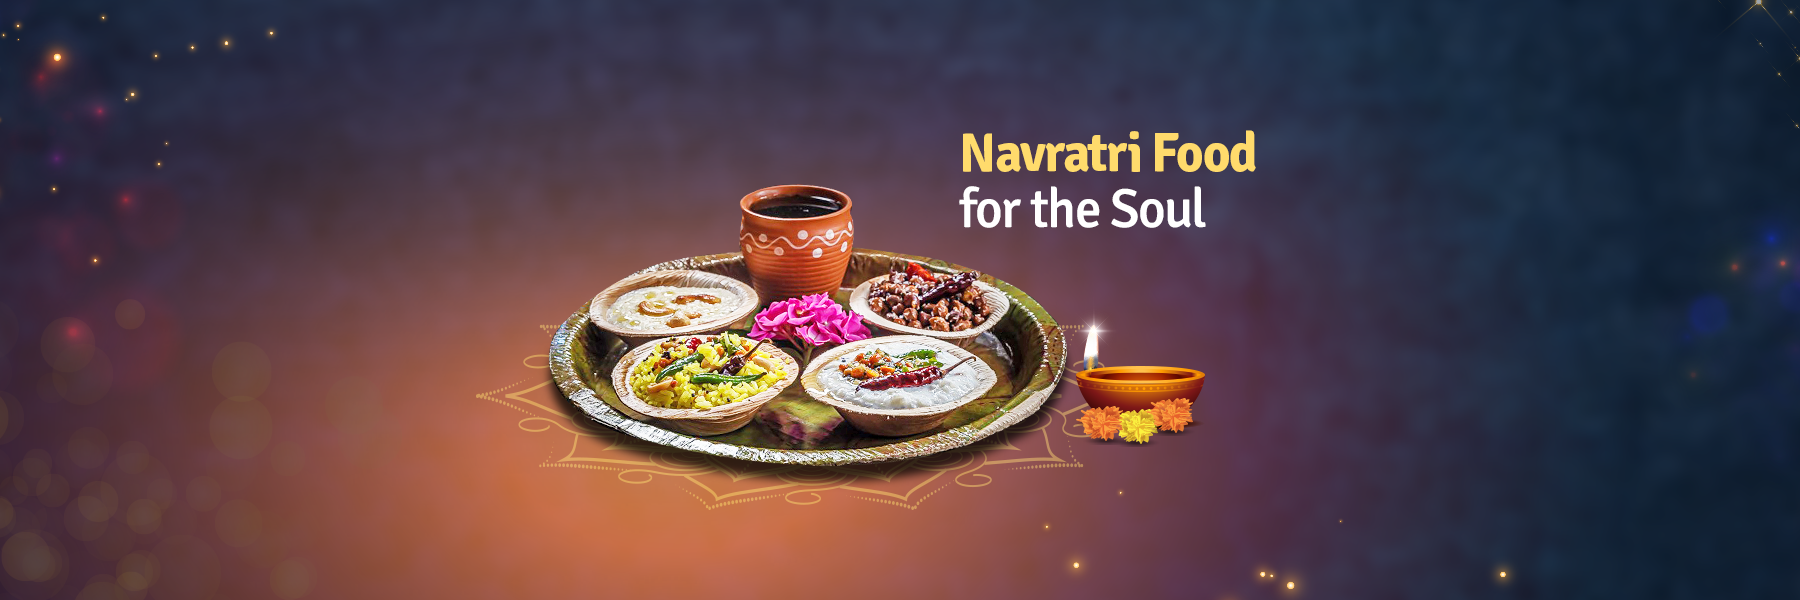 Navratri Food for The Soul FromIndia.com